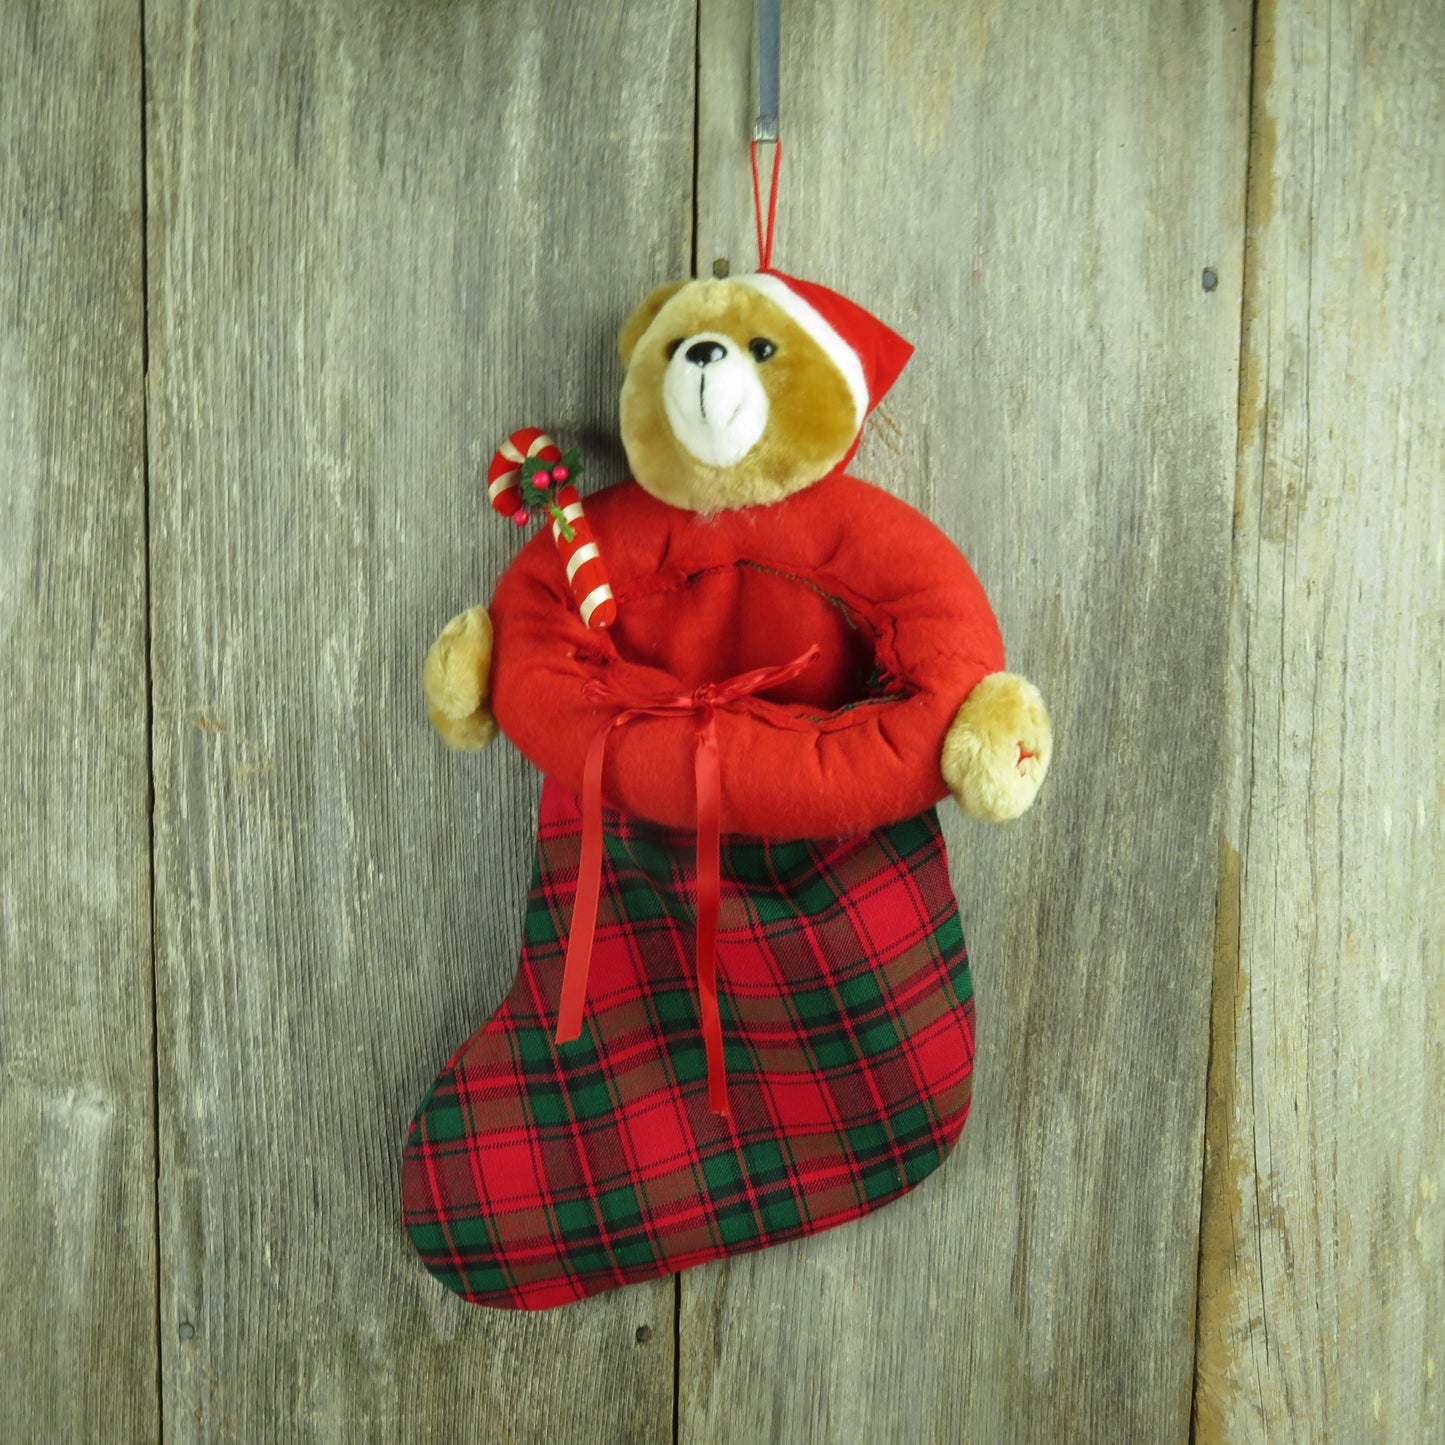 Vintage Teddy Bear Plaid Plush Christmas Stocking Red Green Candy Cane - At Grandma's Table